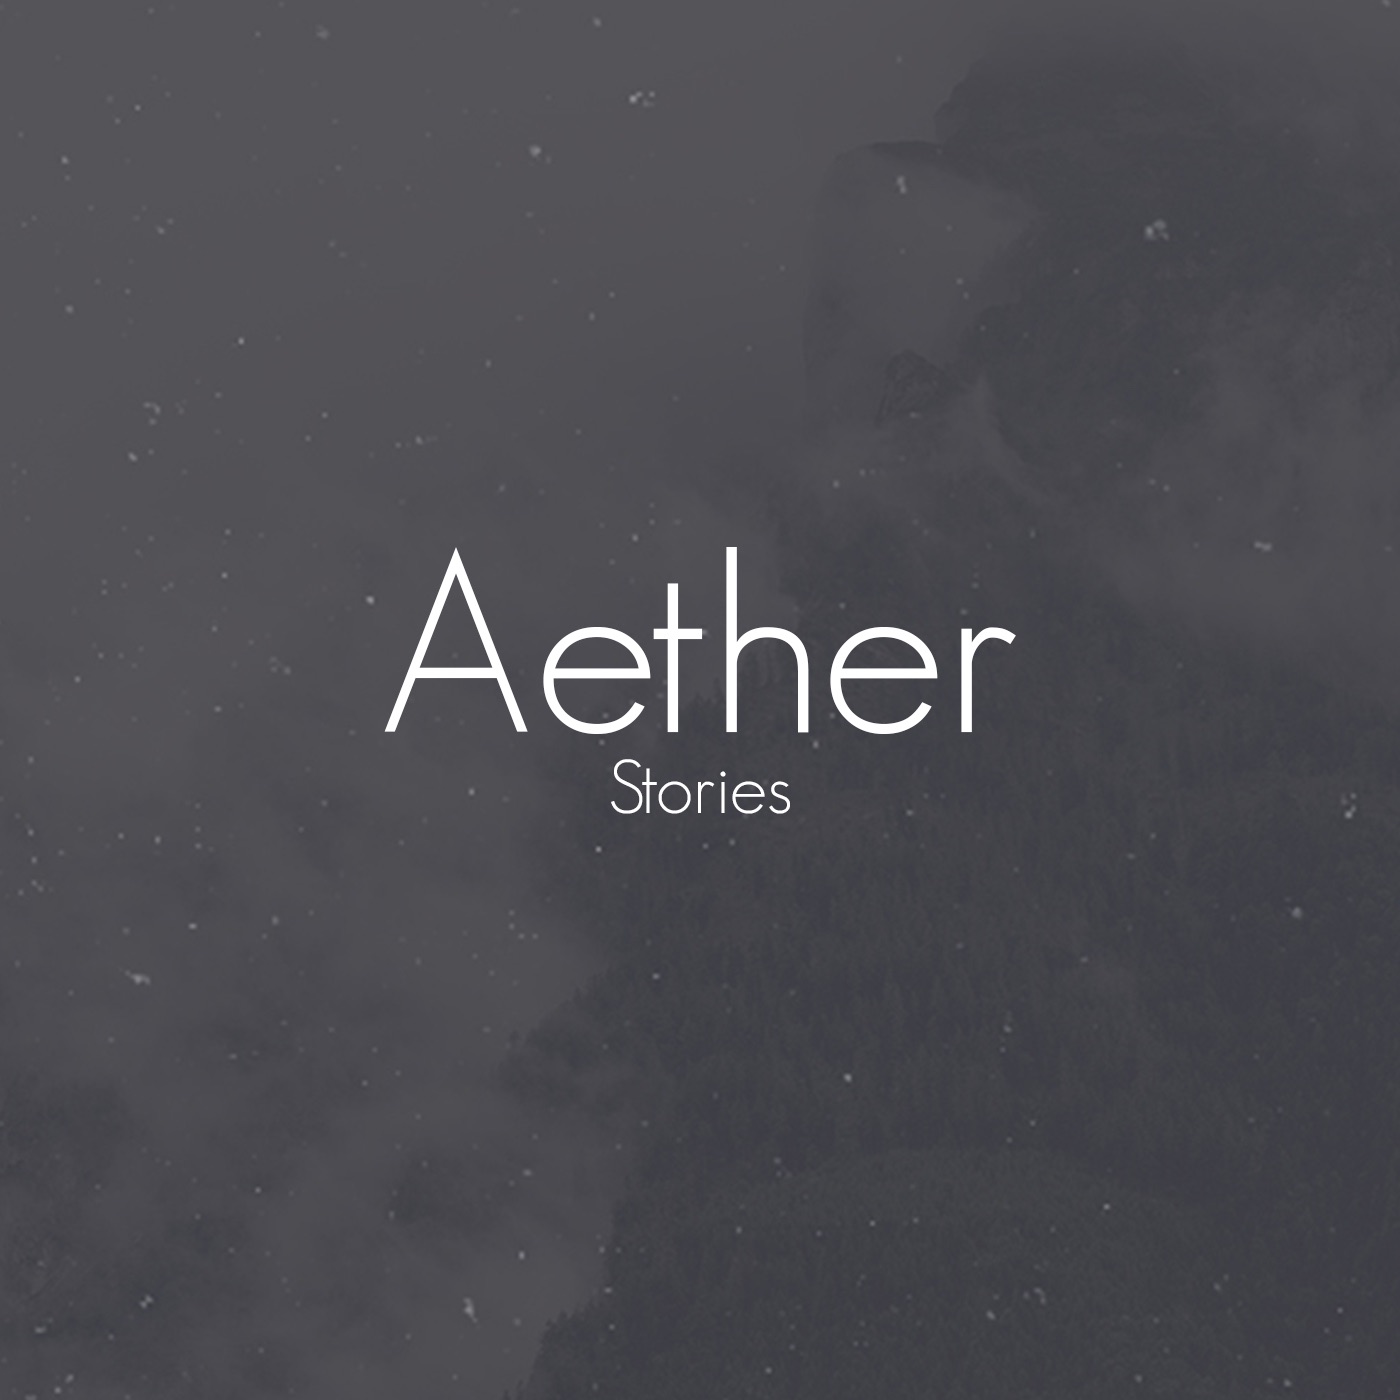 Aether Stories